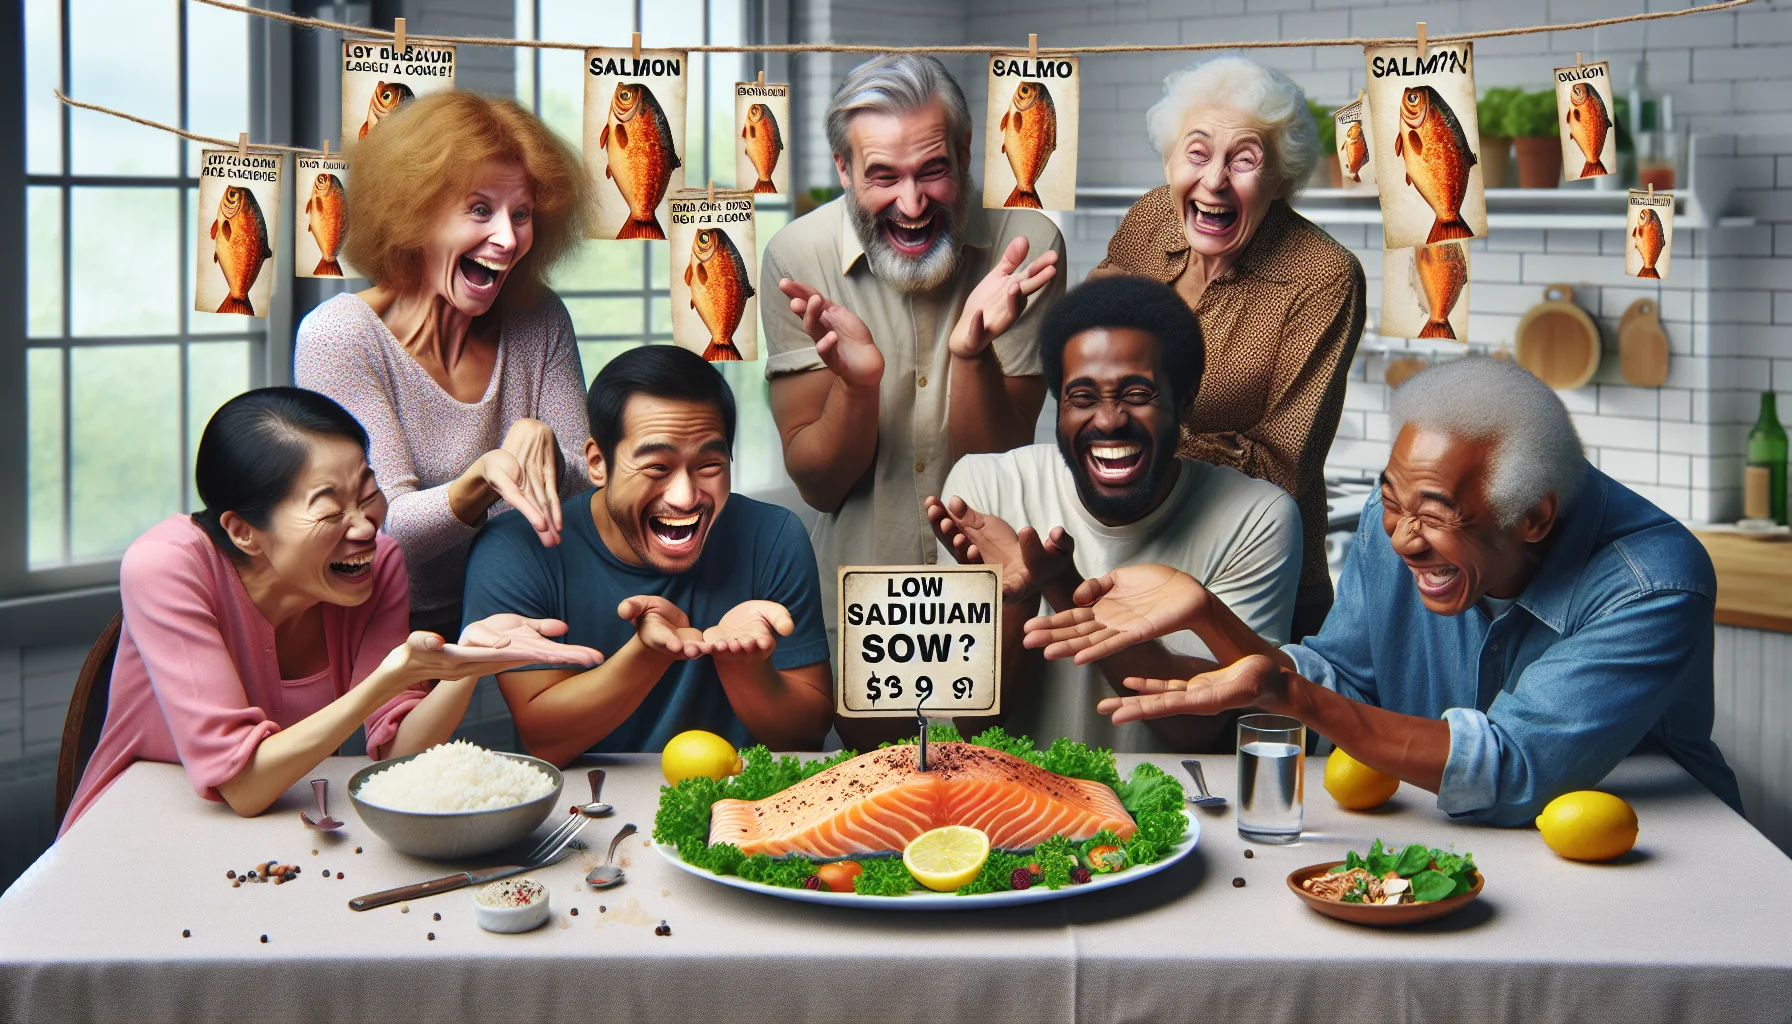 Create a humorous yet realistic scene, focusing on low sodium salmon recipes. Begin with a beautifully garnished salmon dish on a table, with price tags hanging from it showing surprisingly low costs. Around the table, a group of diverse people consisting of a middle-aged Caucasian woman, a young Hispanic man, a senior-aged Black man, and a South Asian child, all laughing riotously. They are pointing at the salmon in disbelief at how affordable and healthy it is. In the background, perhaps adorn the setting with light-hearted, healthy food-related posters to enforce the theme of eating healthy for less money.